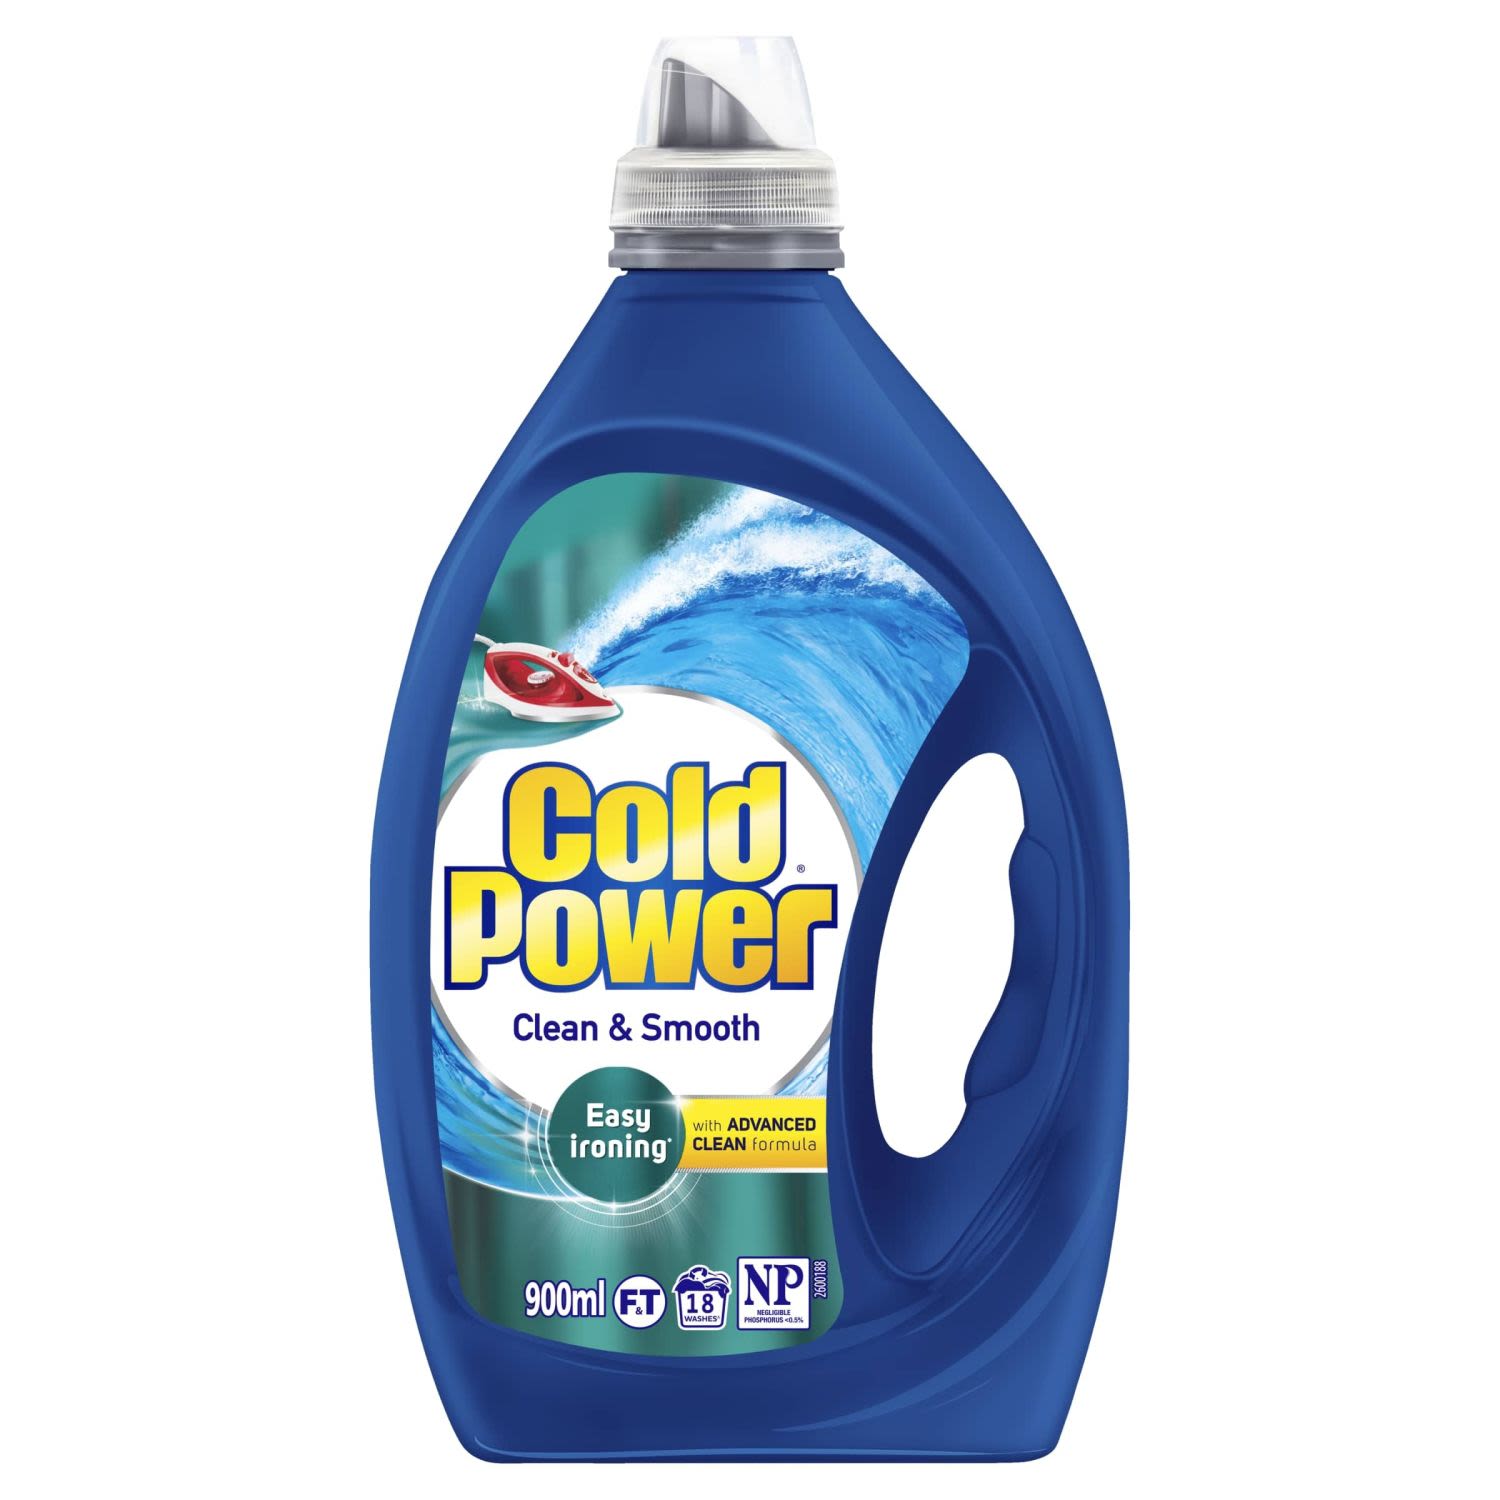 Cold Power Clean & Smooth Laundry Detergent Liquid Easy Ironing, 900 Millilitre